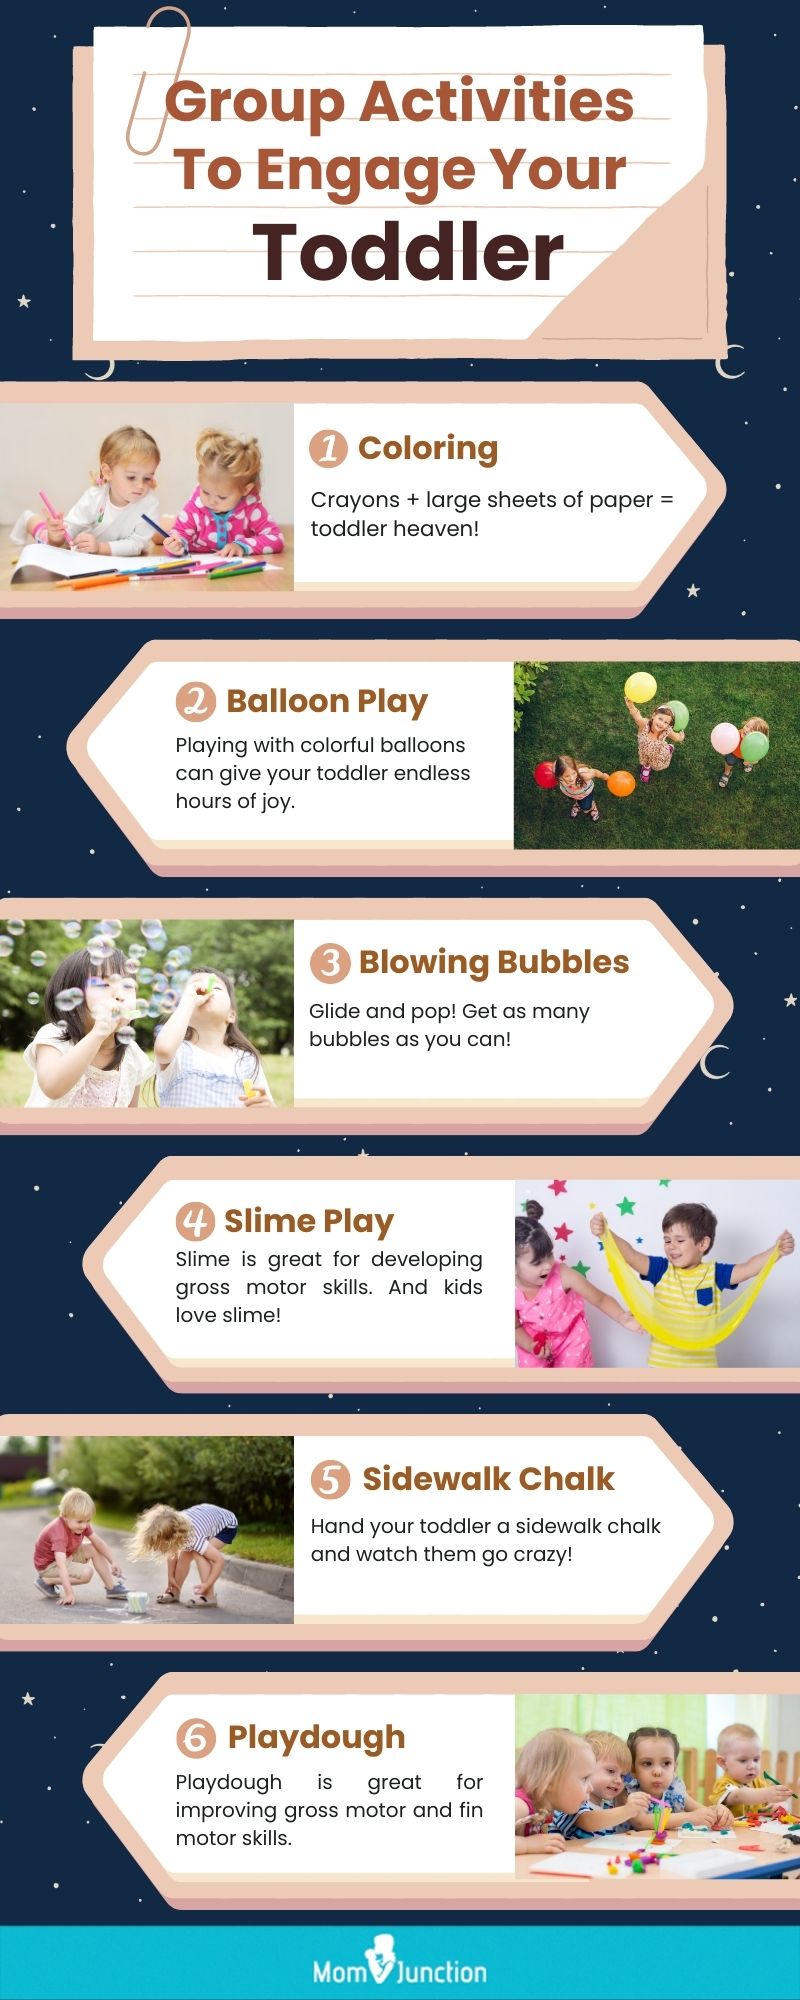 group activities to engage your toddler (infographic)